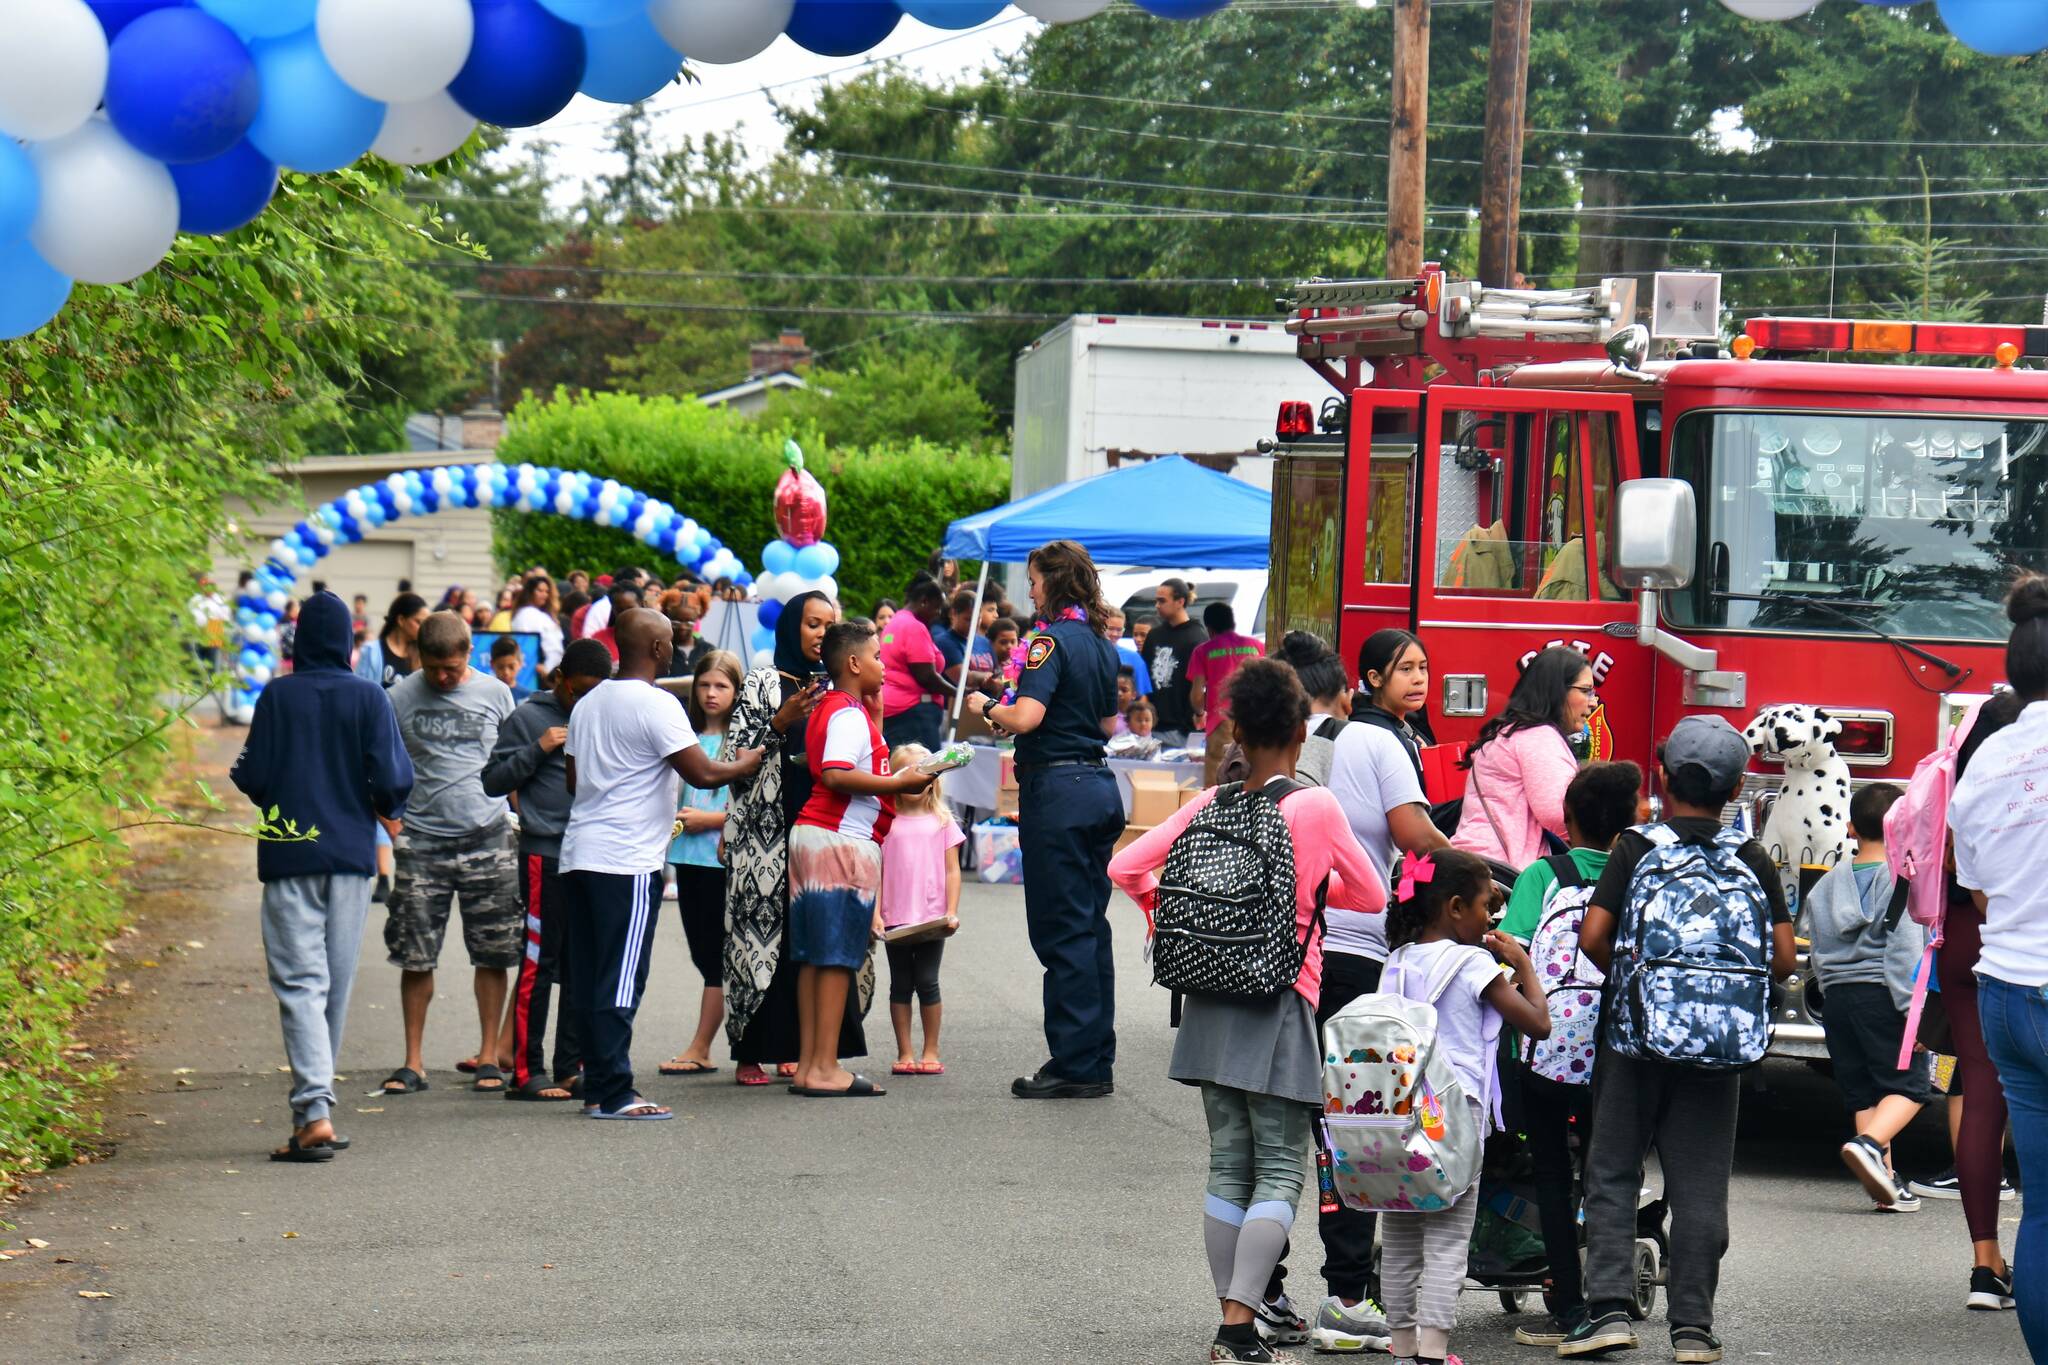 Last year’s Boys and Girls Club back to school event drew over 1,000 kids and their families. (Photo courtesy of Bruce Honda)